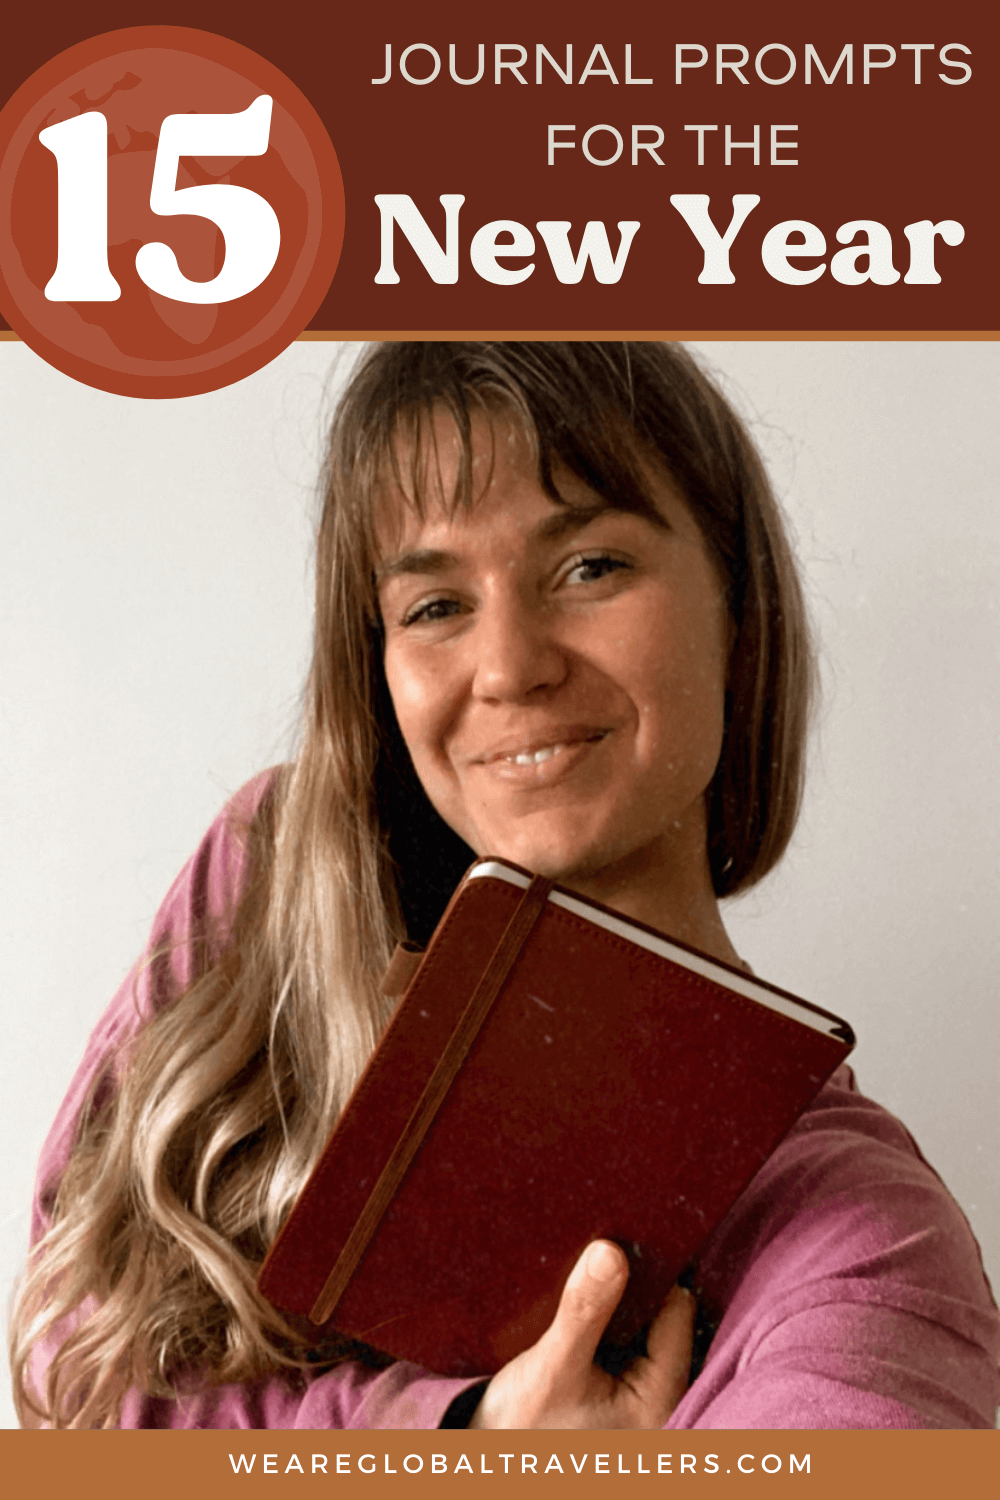 15 New Year Journal Prompts for 2022